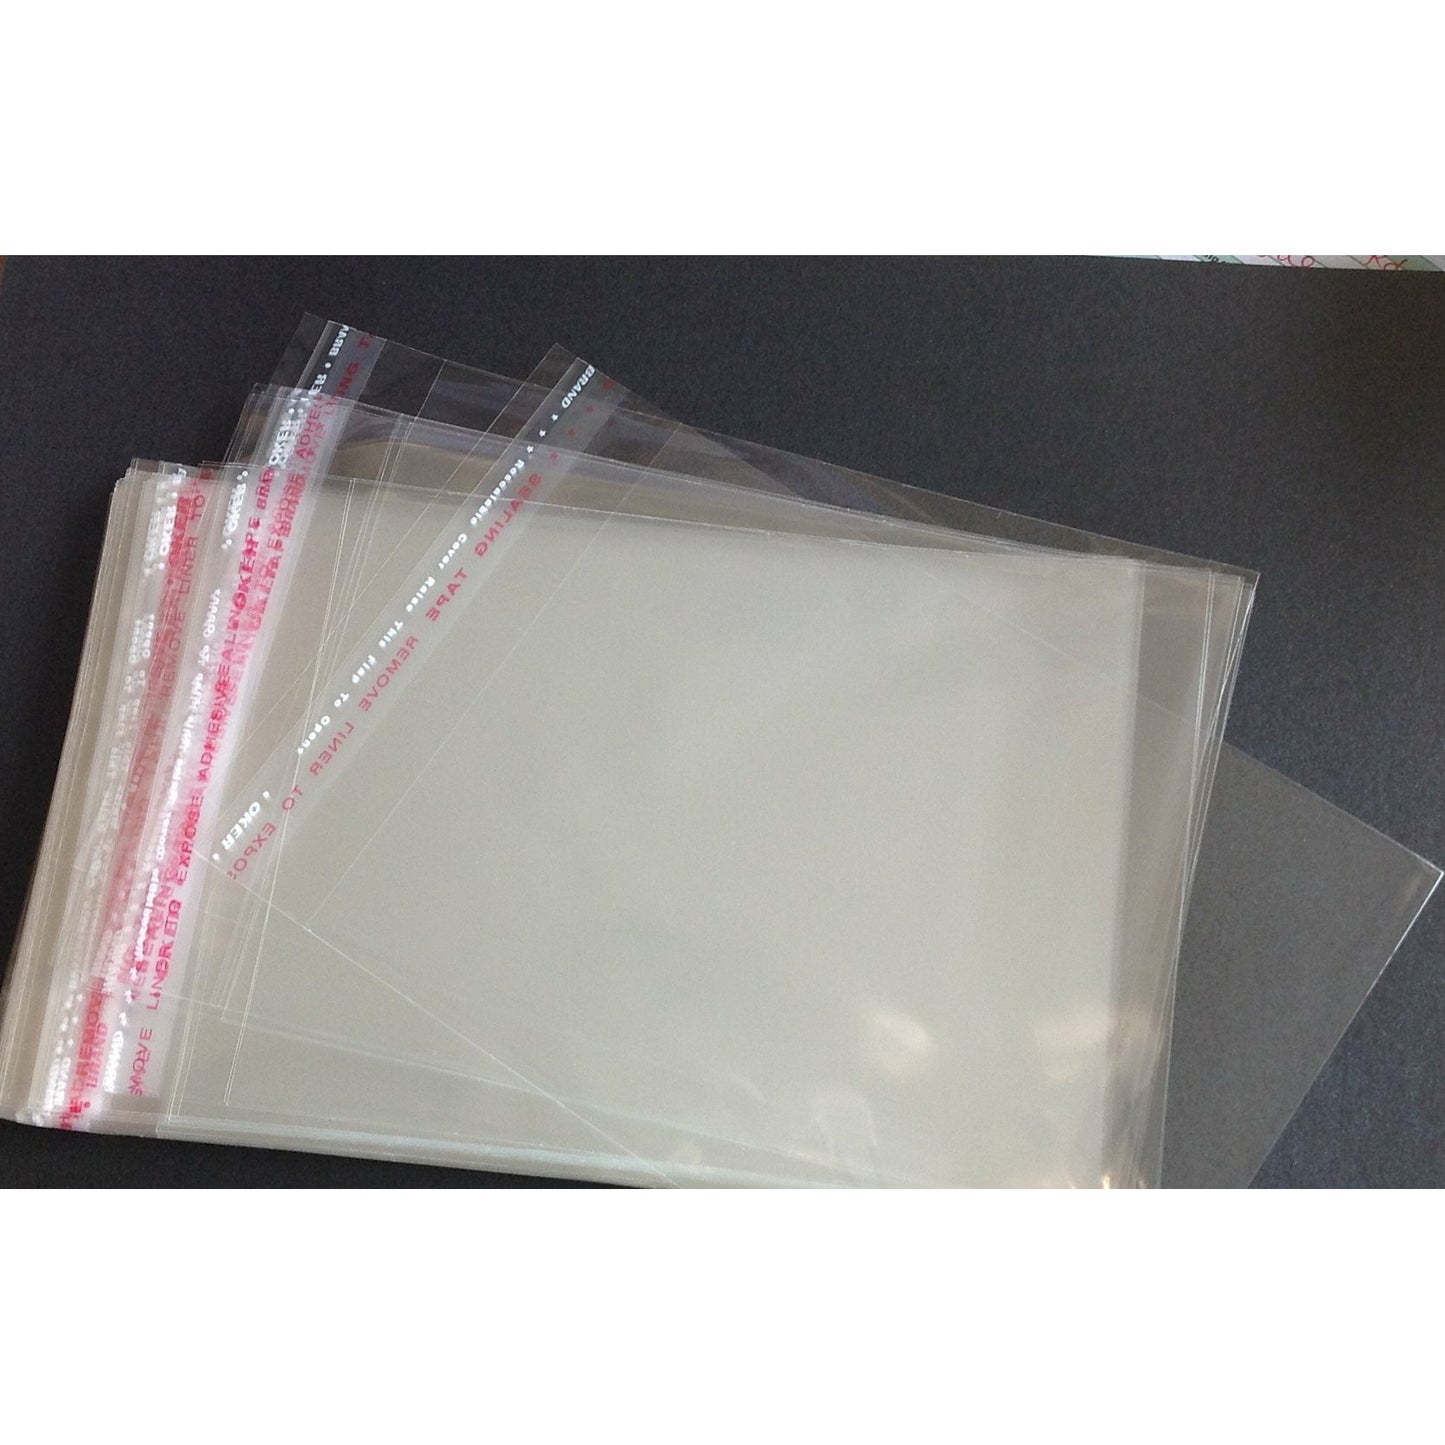 150 x 230mm Cellophane Clear Resealable Bags  (Fits A5) Pack of 100 Bags